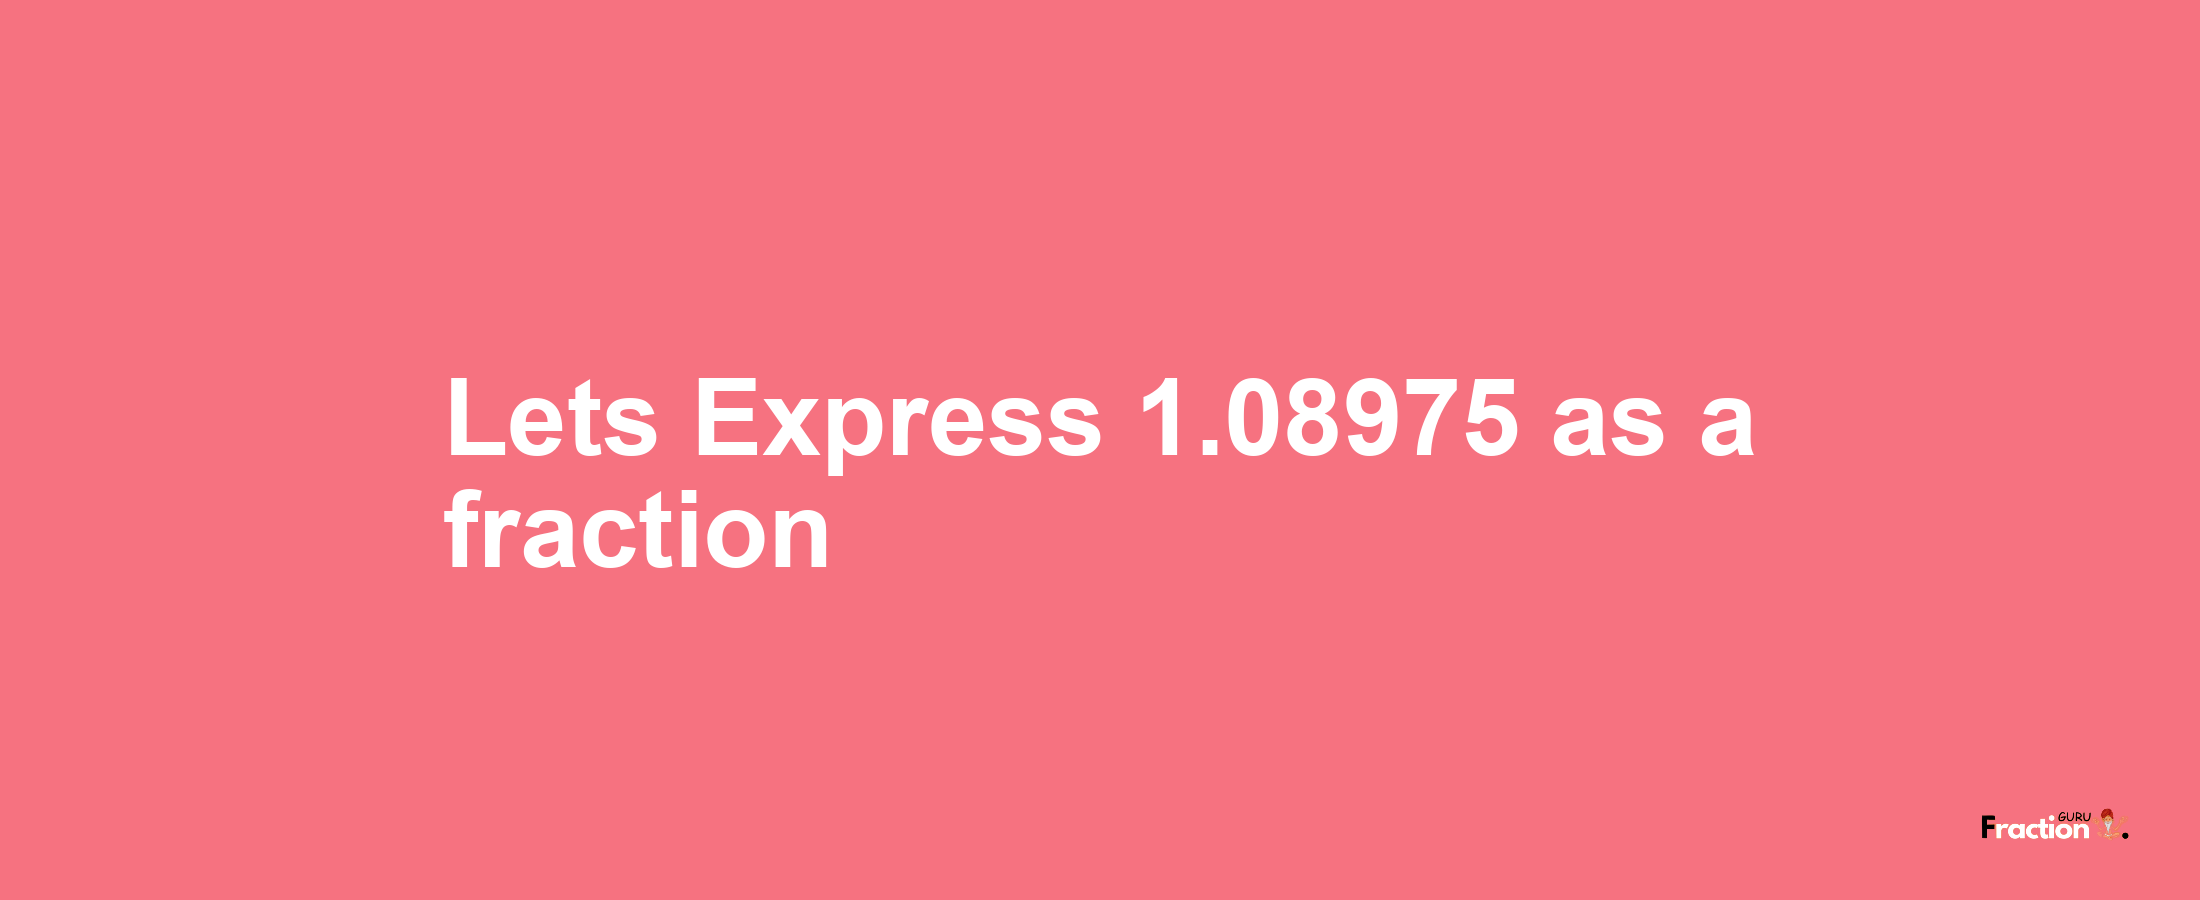 Lets Express 1.08975 as afraction